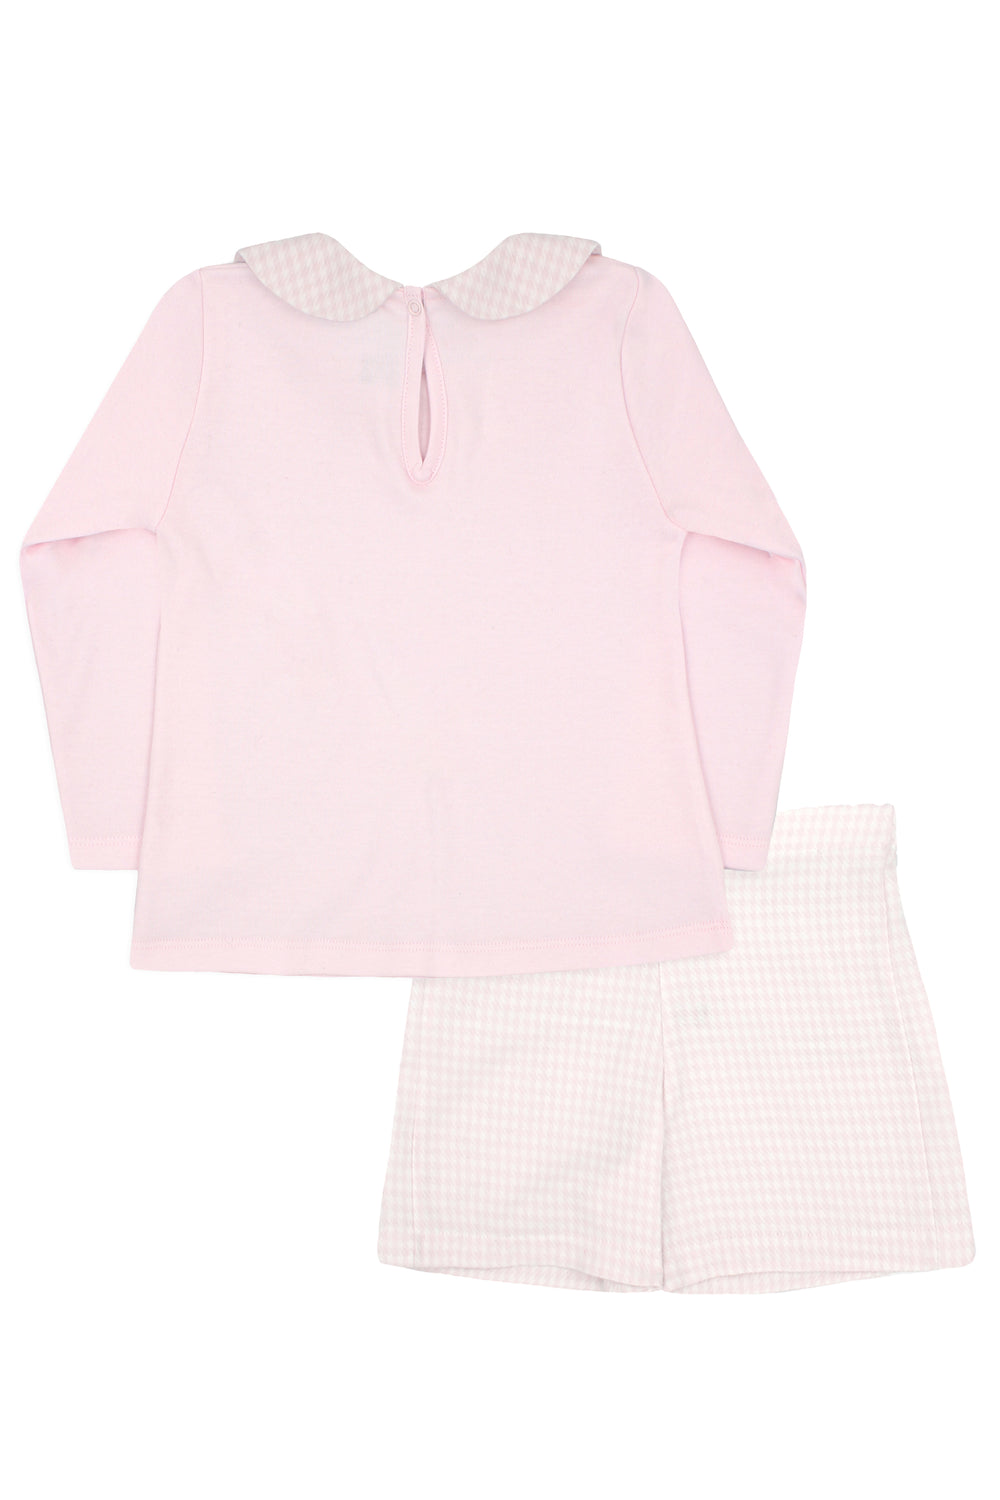 Rapife "Alison" Pink Houndstooth Top & Shorts | Millie and John